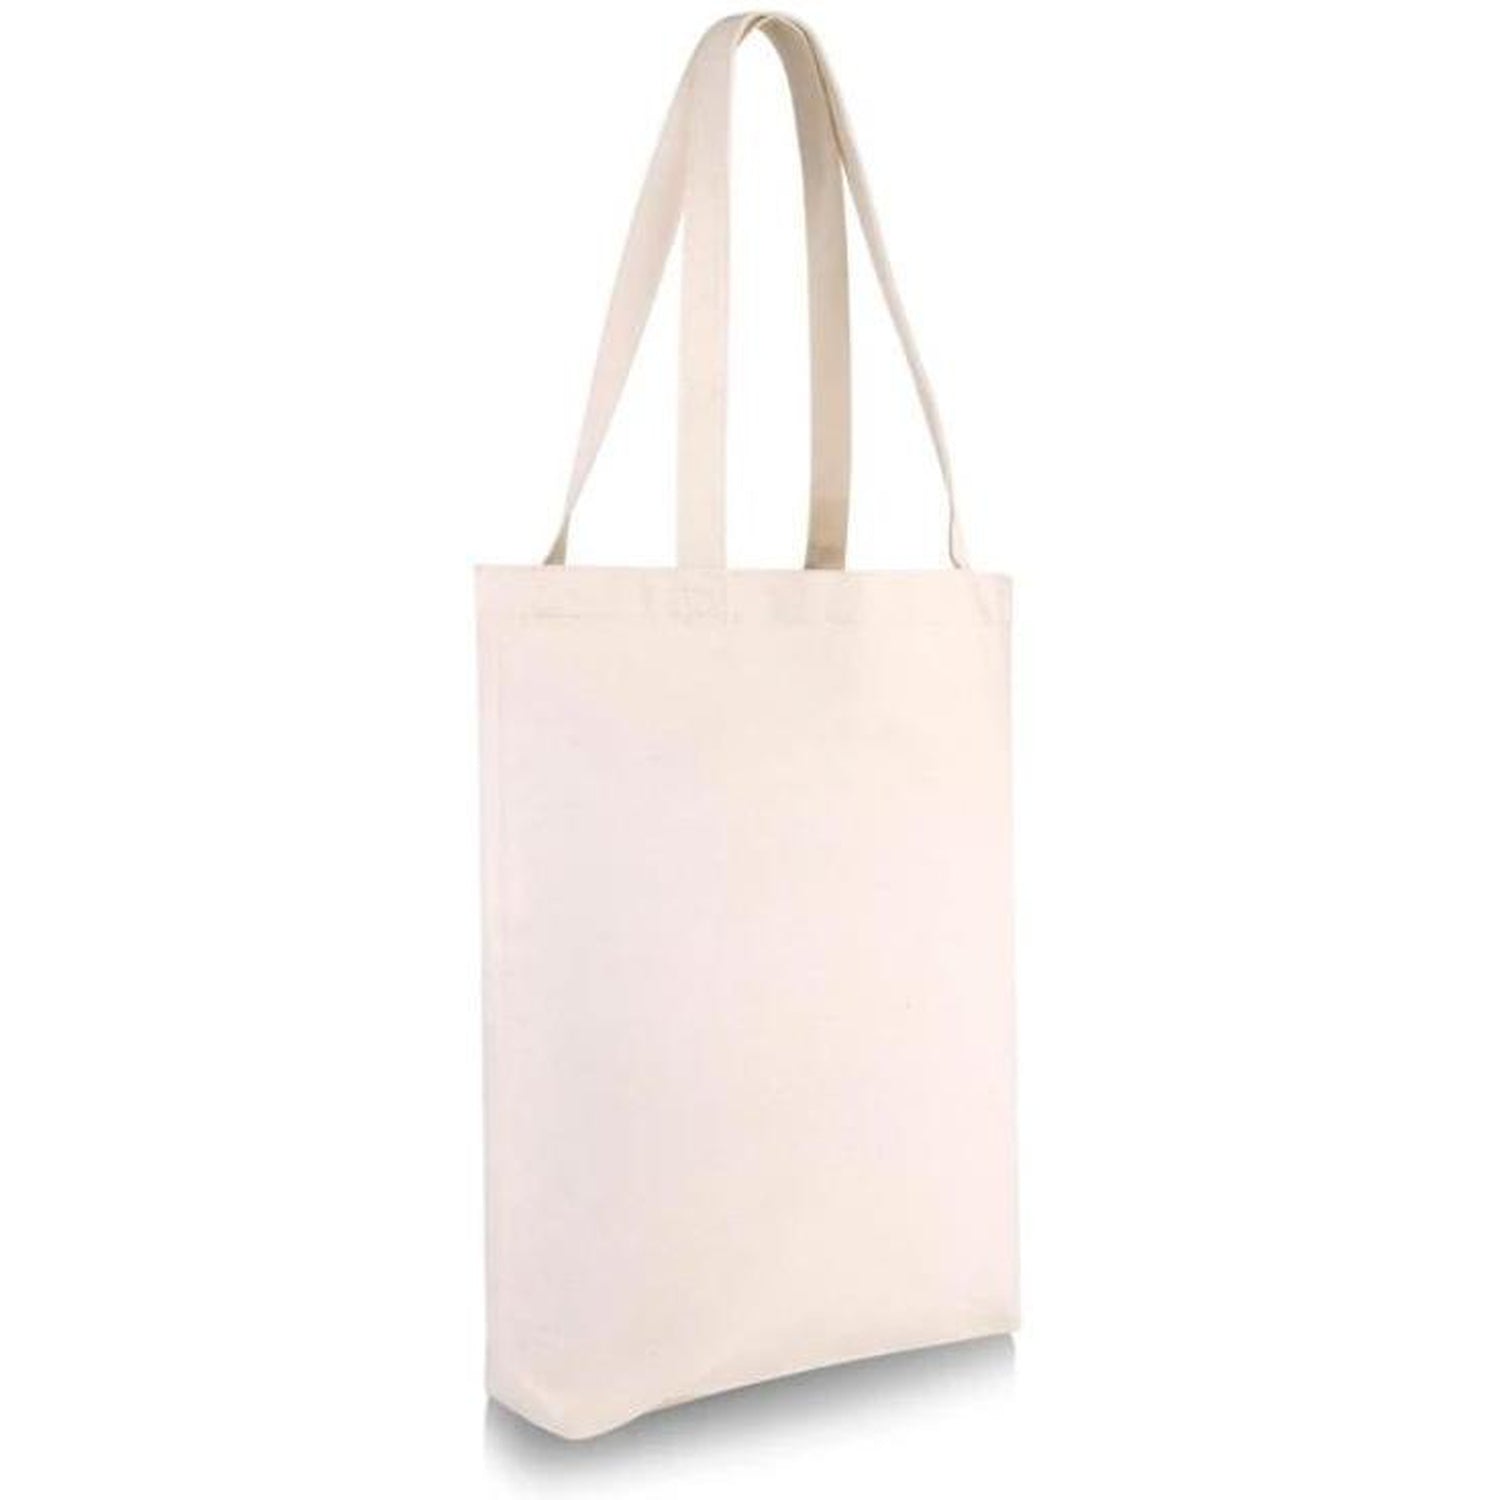 Canvas Tote Bags, Wholesale Canvas Tote Bags with Long Handles – BagzDepot™